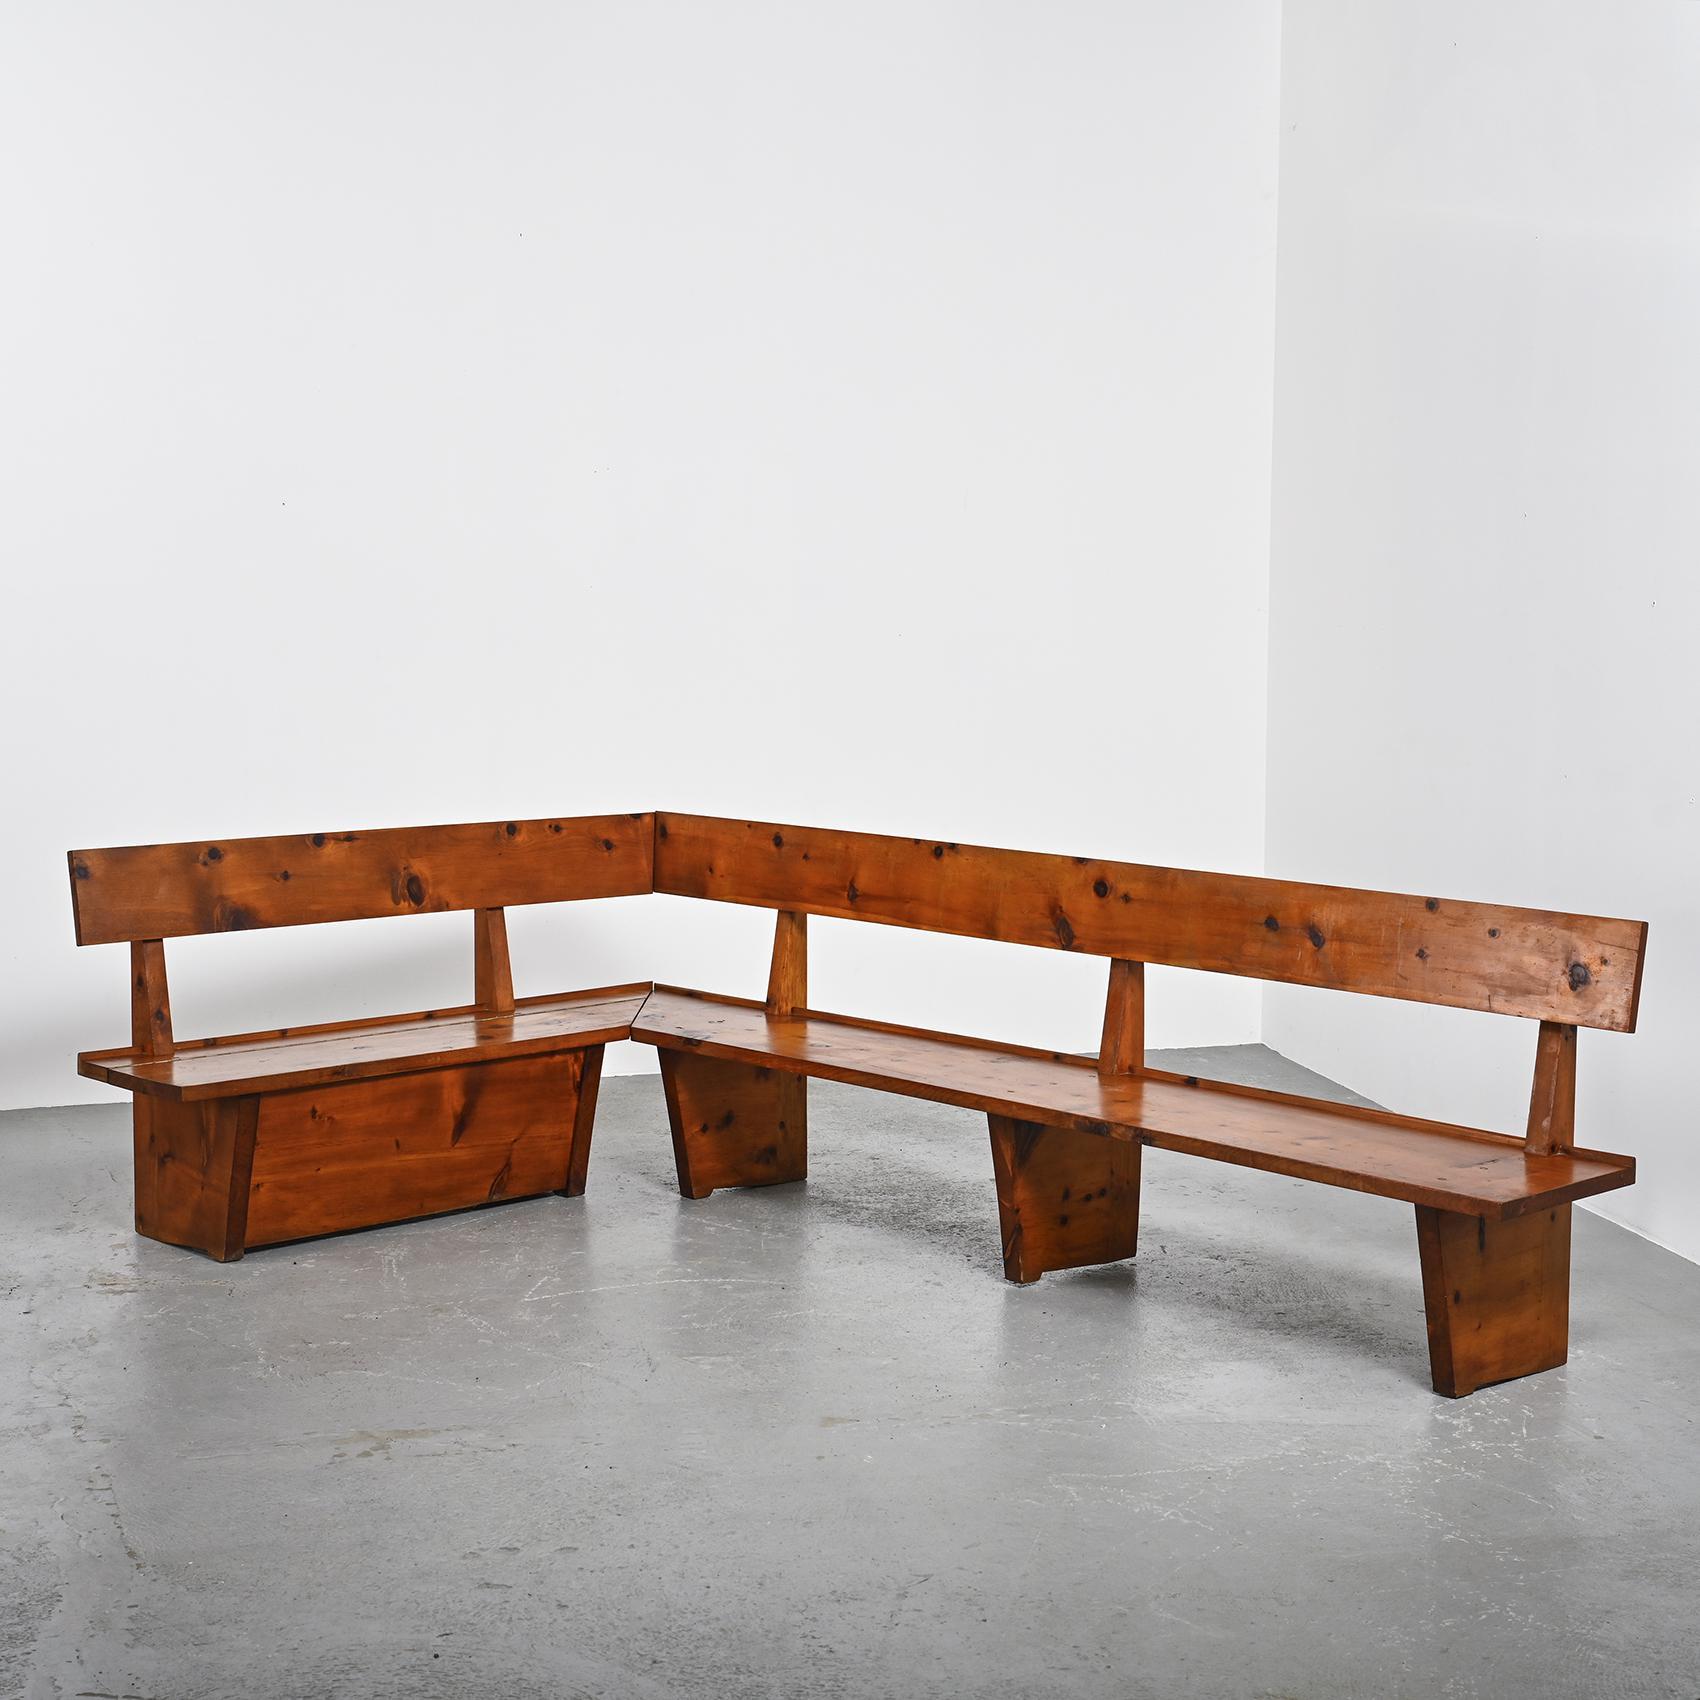 Very large solid wood corner bench, mountain furniture originating from the French Alps. Its simple design will be appreciated and ideal for a large entrance or reception area.

Consisting of two parts that fix together, the bench offers integrated